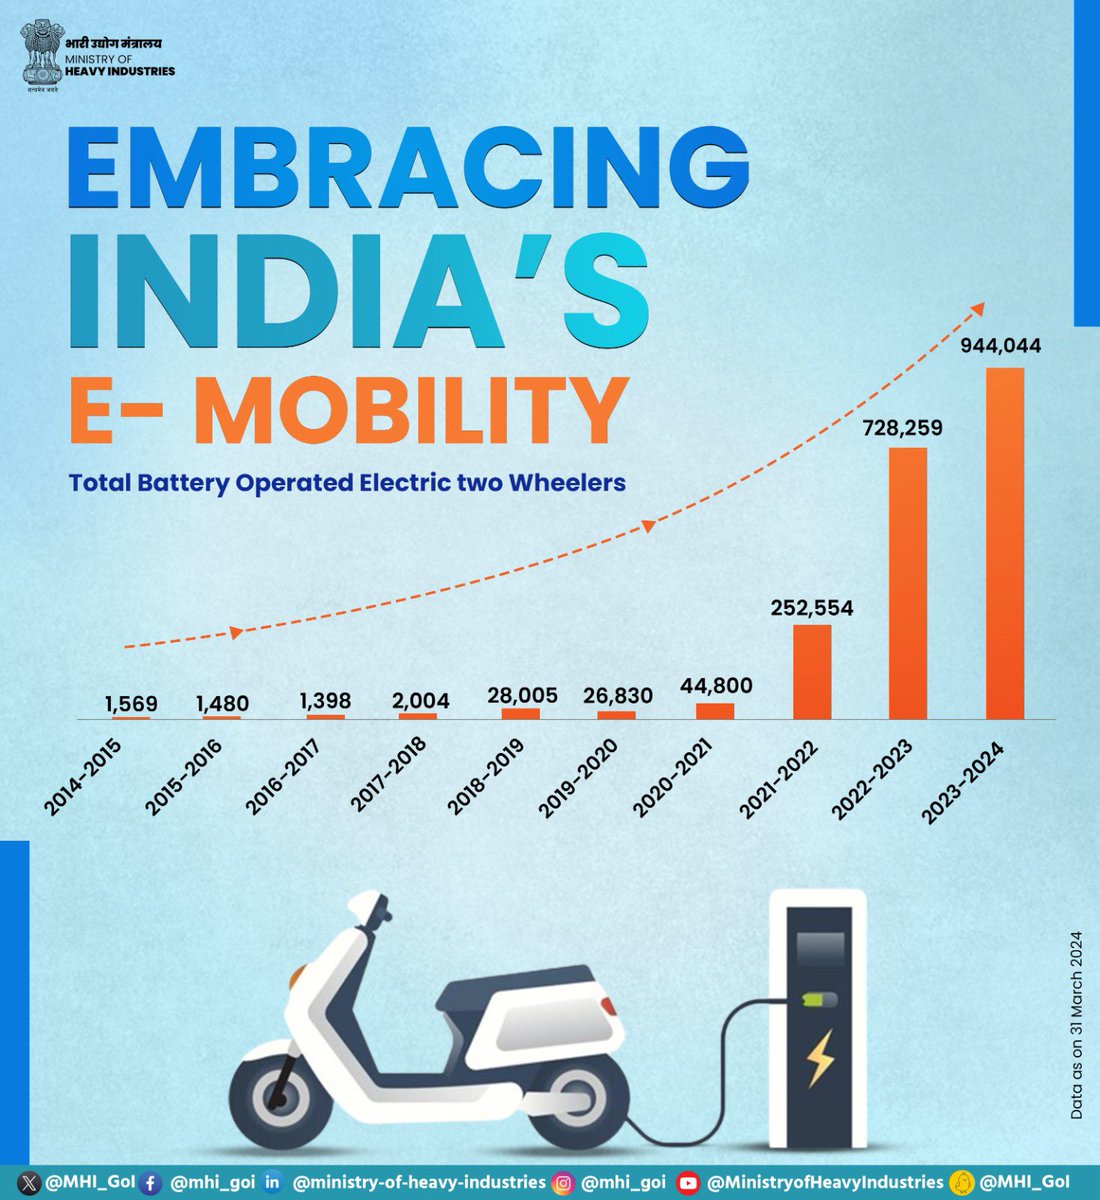 India's booming battery-operated Two Wheeler sales fuel the growth of the EV industry. With a remarkable 103.62% CAGR as shown in the graph, it highlights the crucial role of E-2W expansion in shaping India's environmental, economic, societal, and global future. #EVs